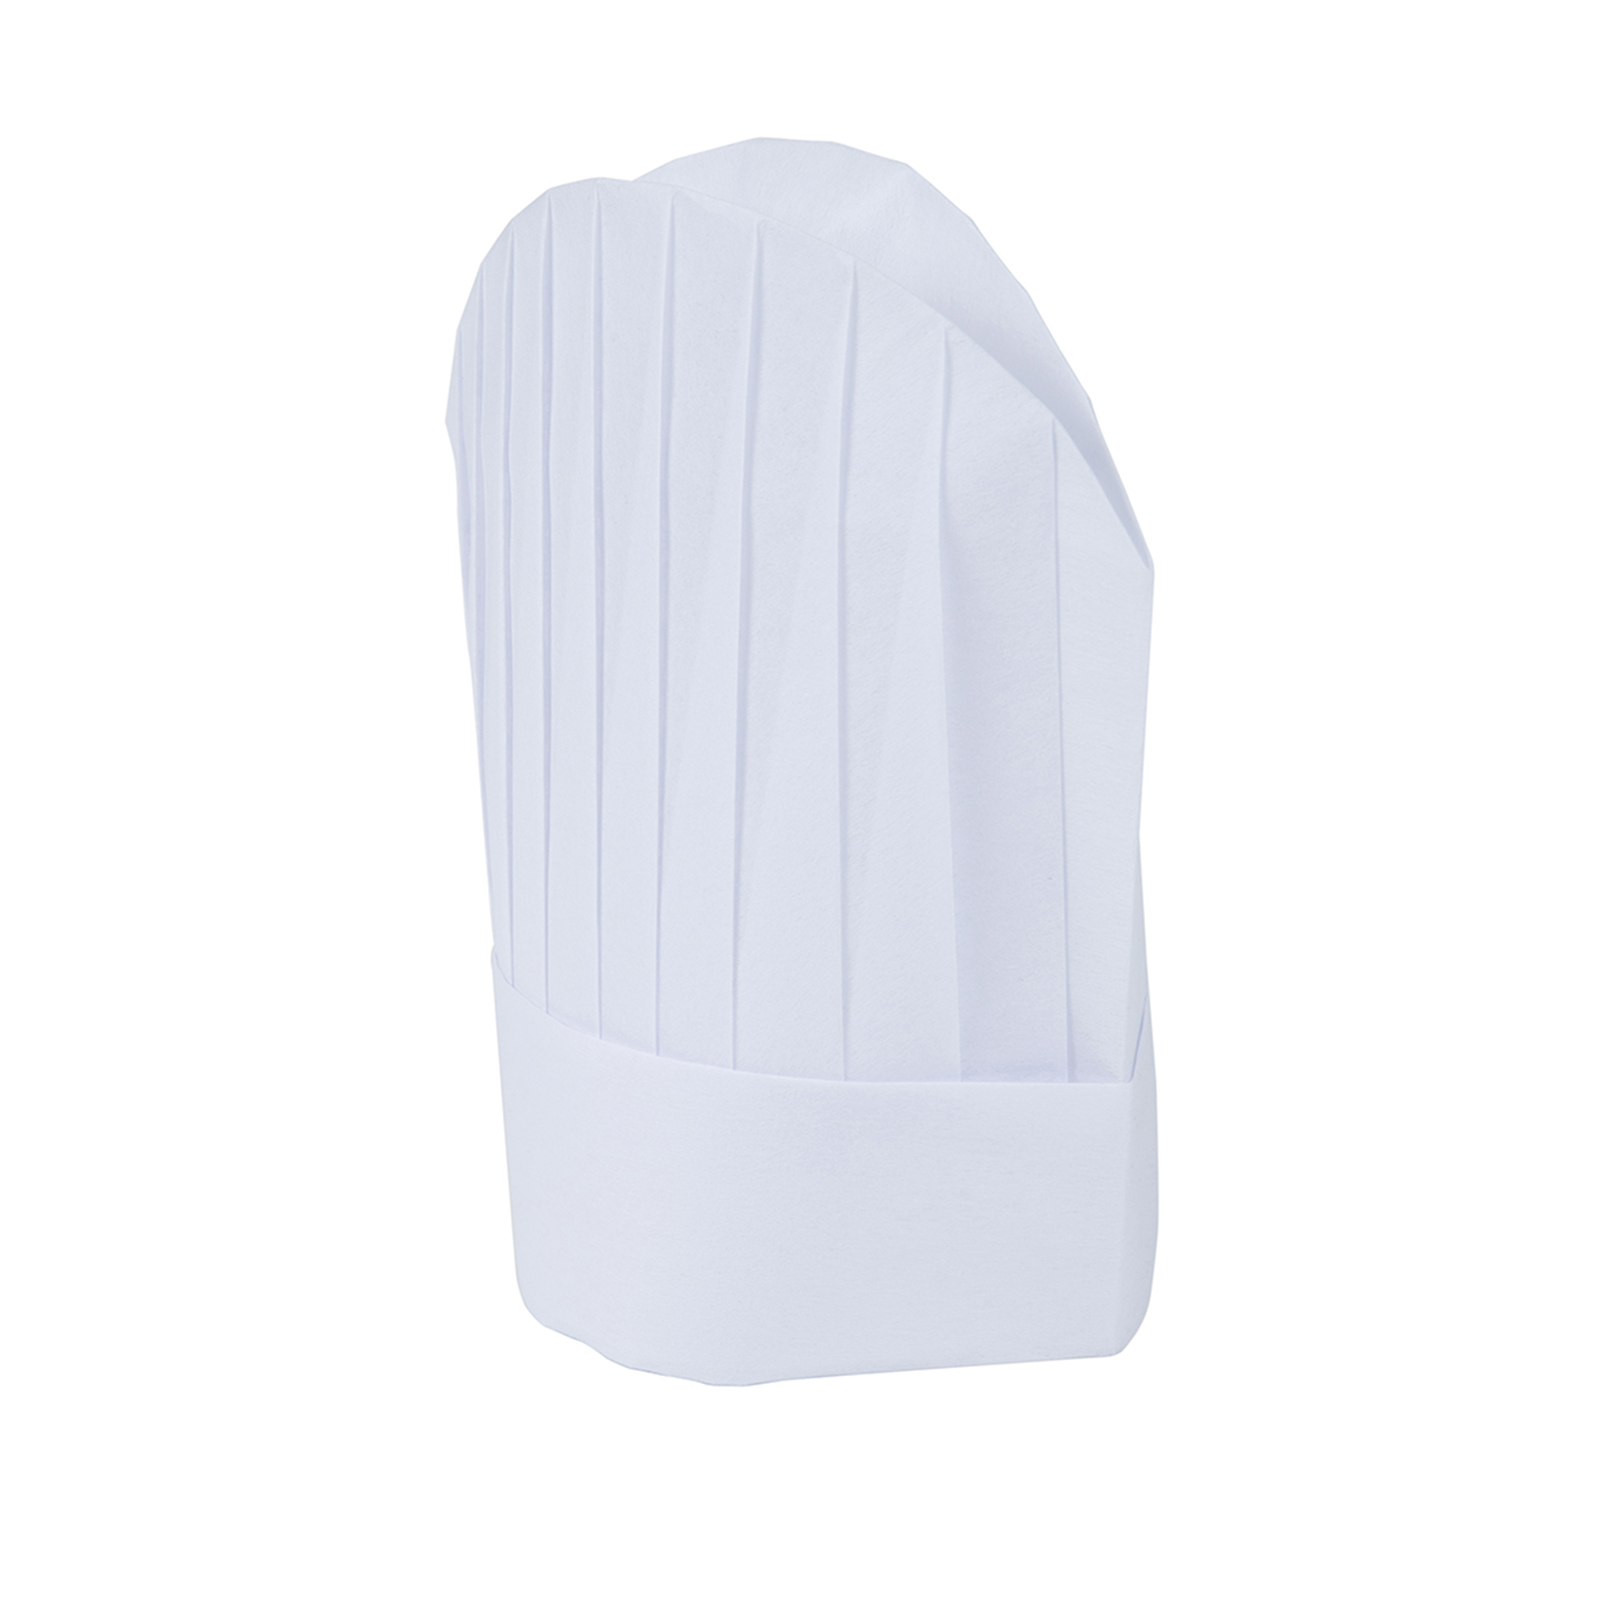 Mercer Culinary M61160WH Disposable Chef's Hat